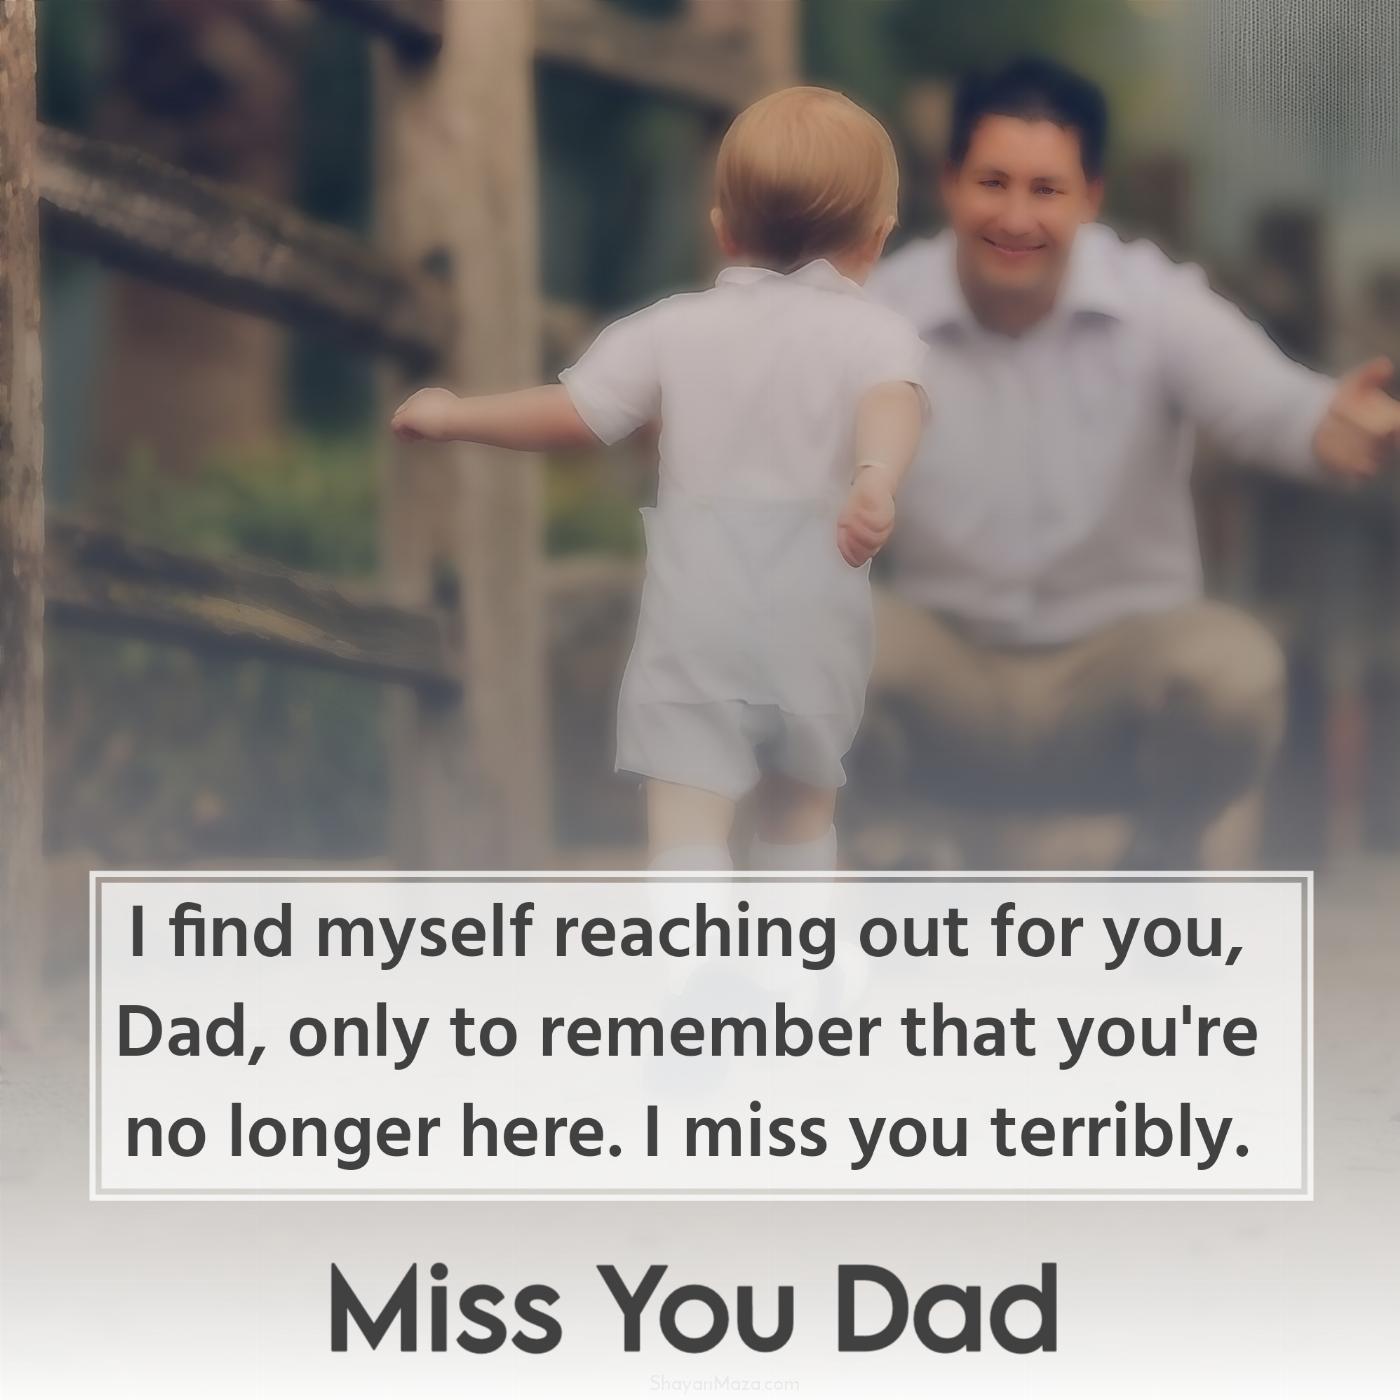 I find myself reaching out for you Dad only to remember that you're no longer here